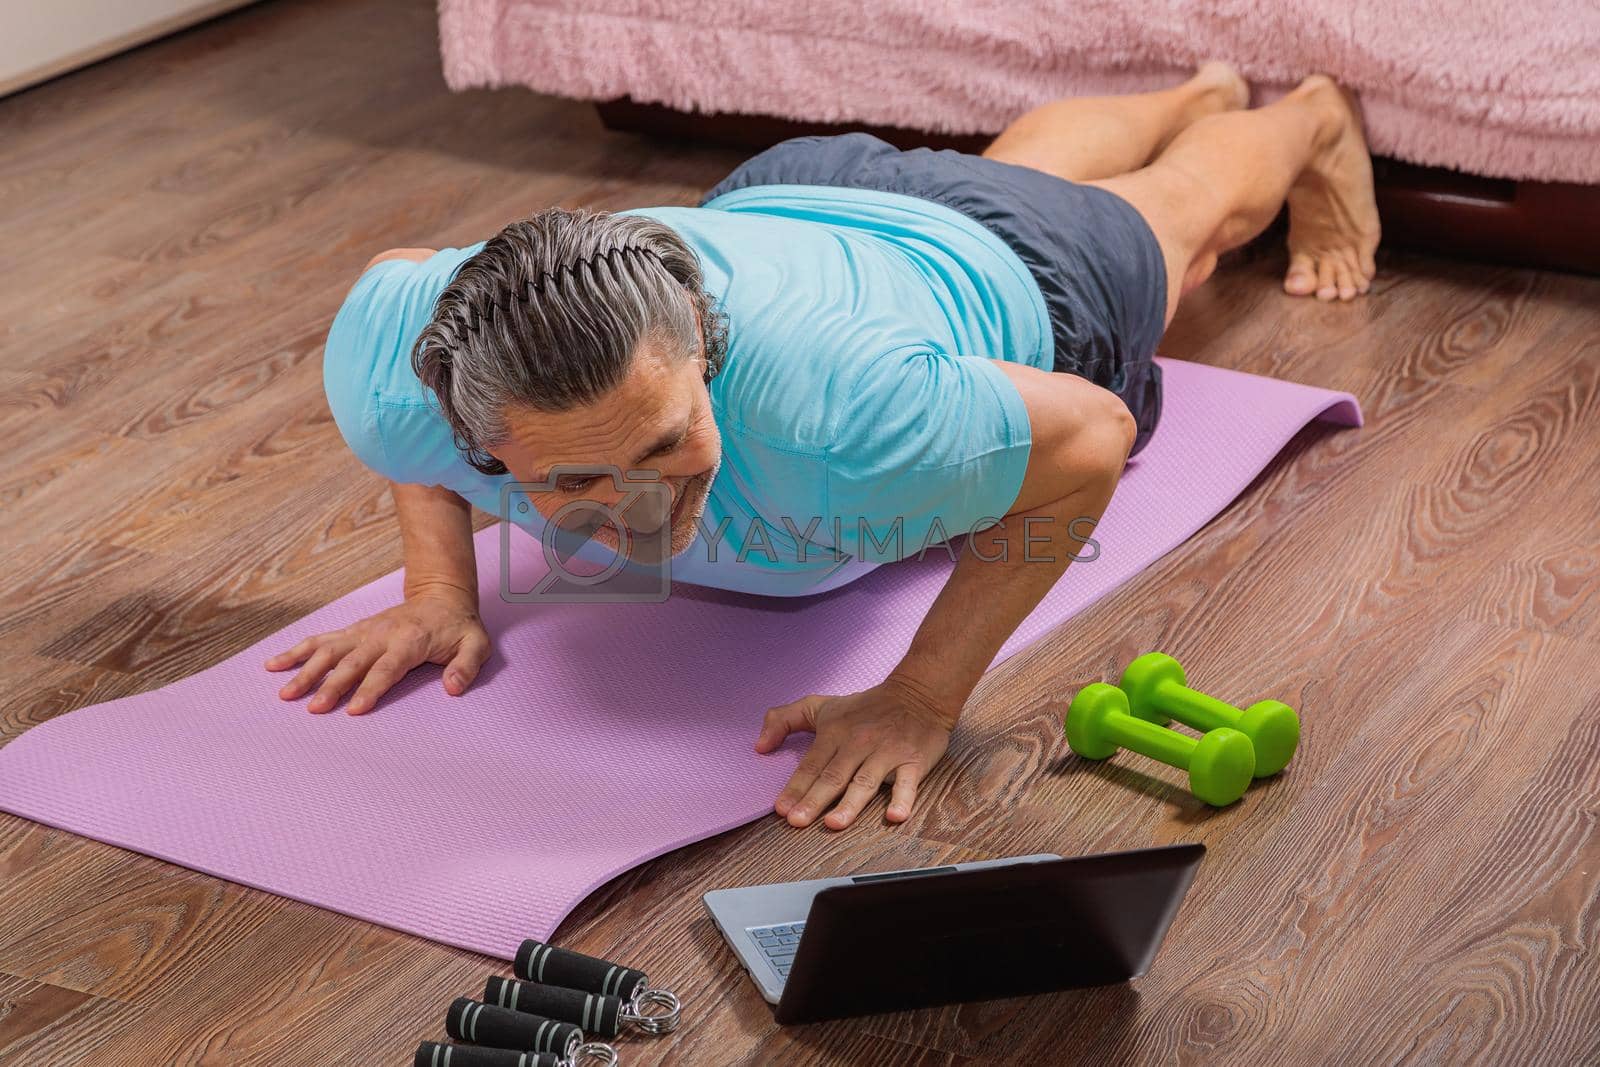 Royalty free image of 50 year old man performs exercises lying on mat at home looking at computer by Yurich32